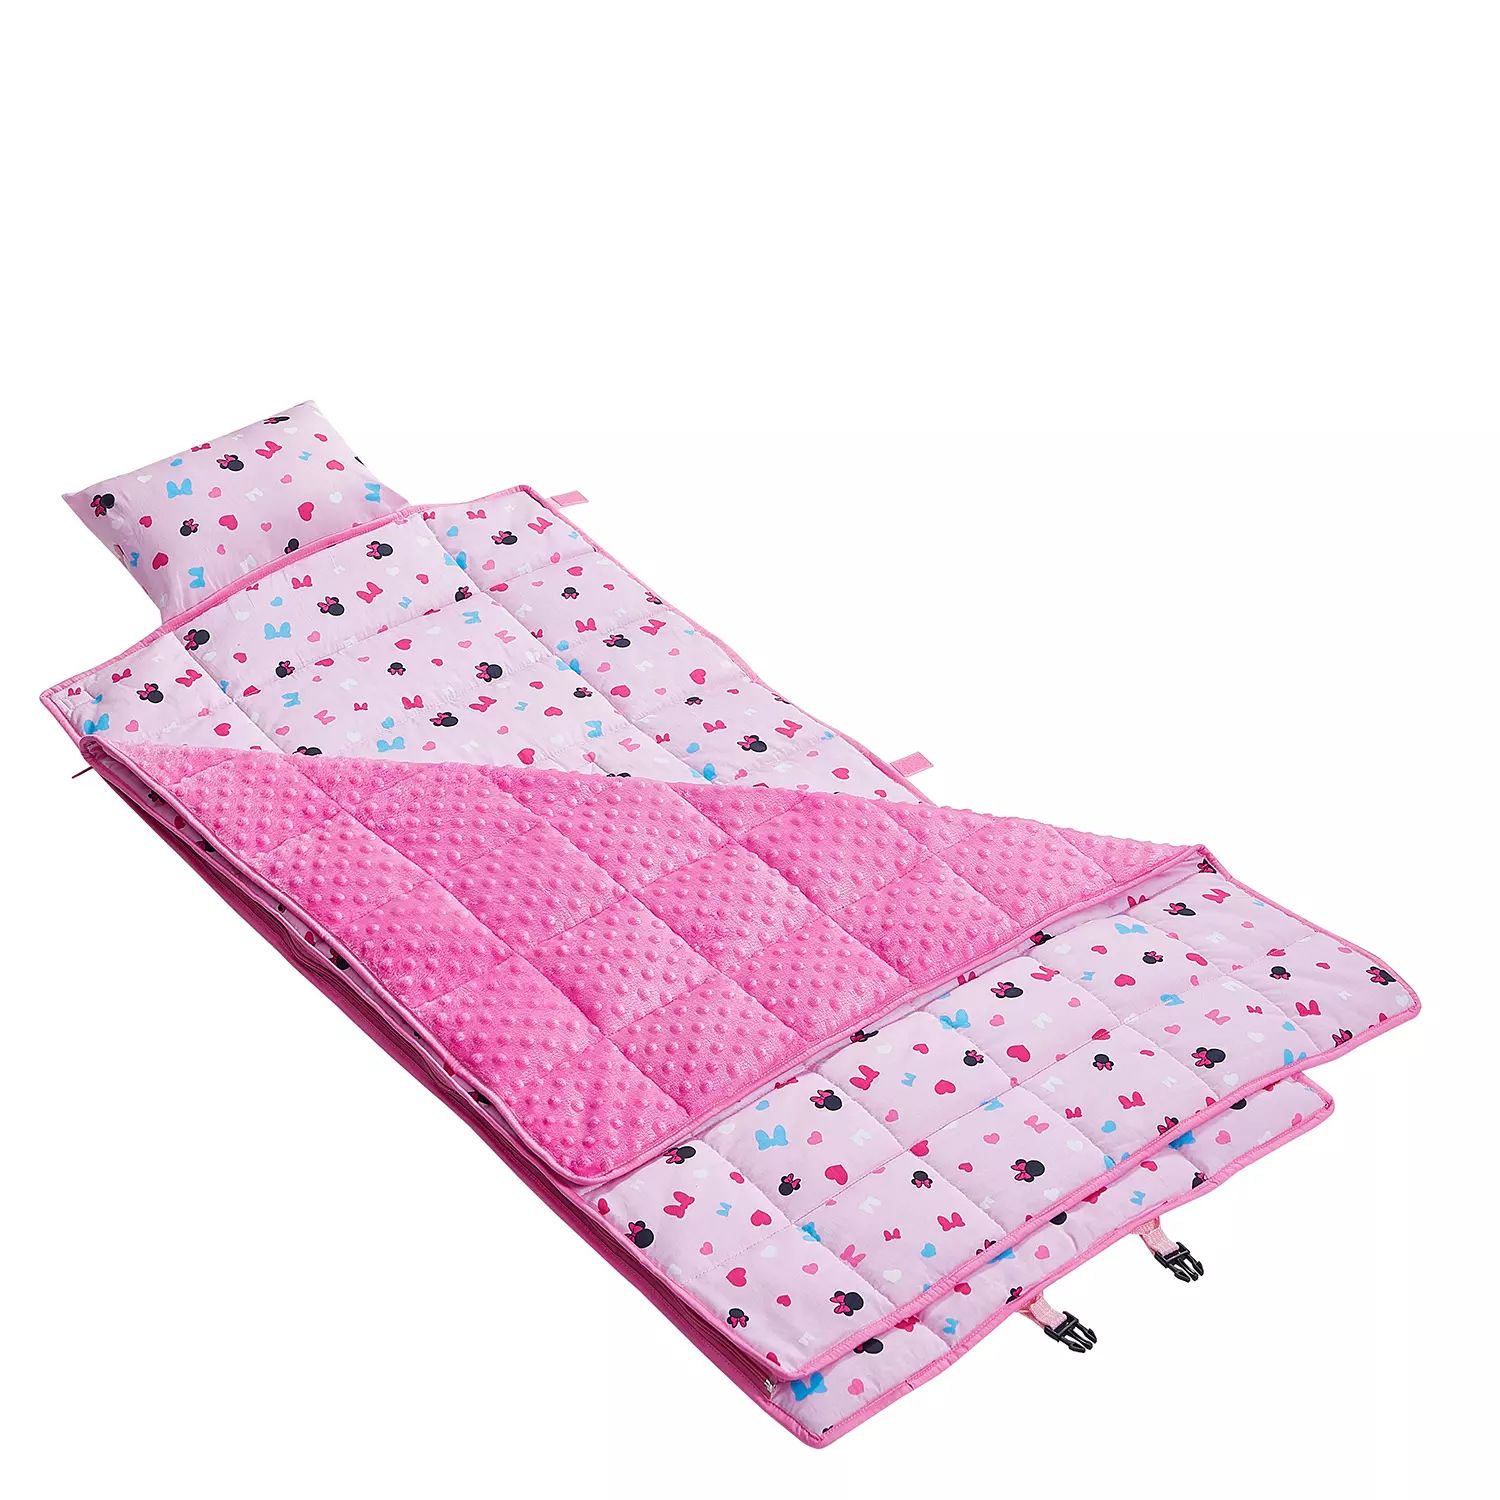 Minnie Nap Mat With Removable Blanket | Sam's Club